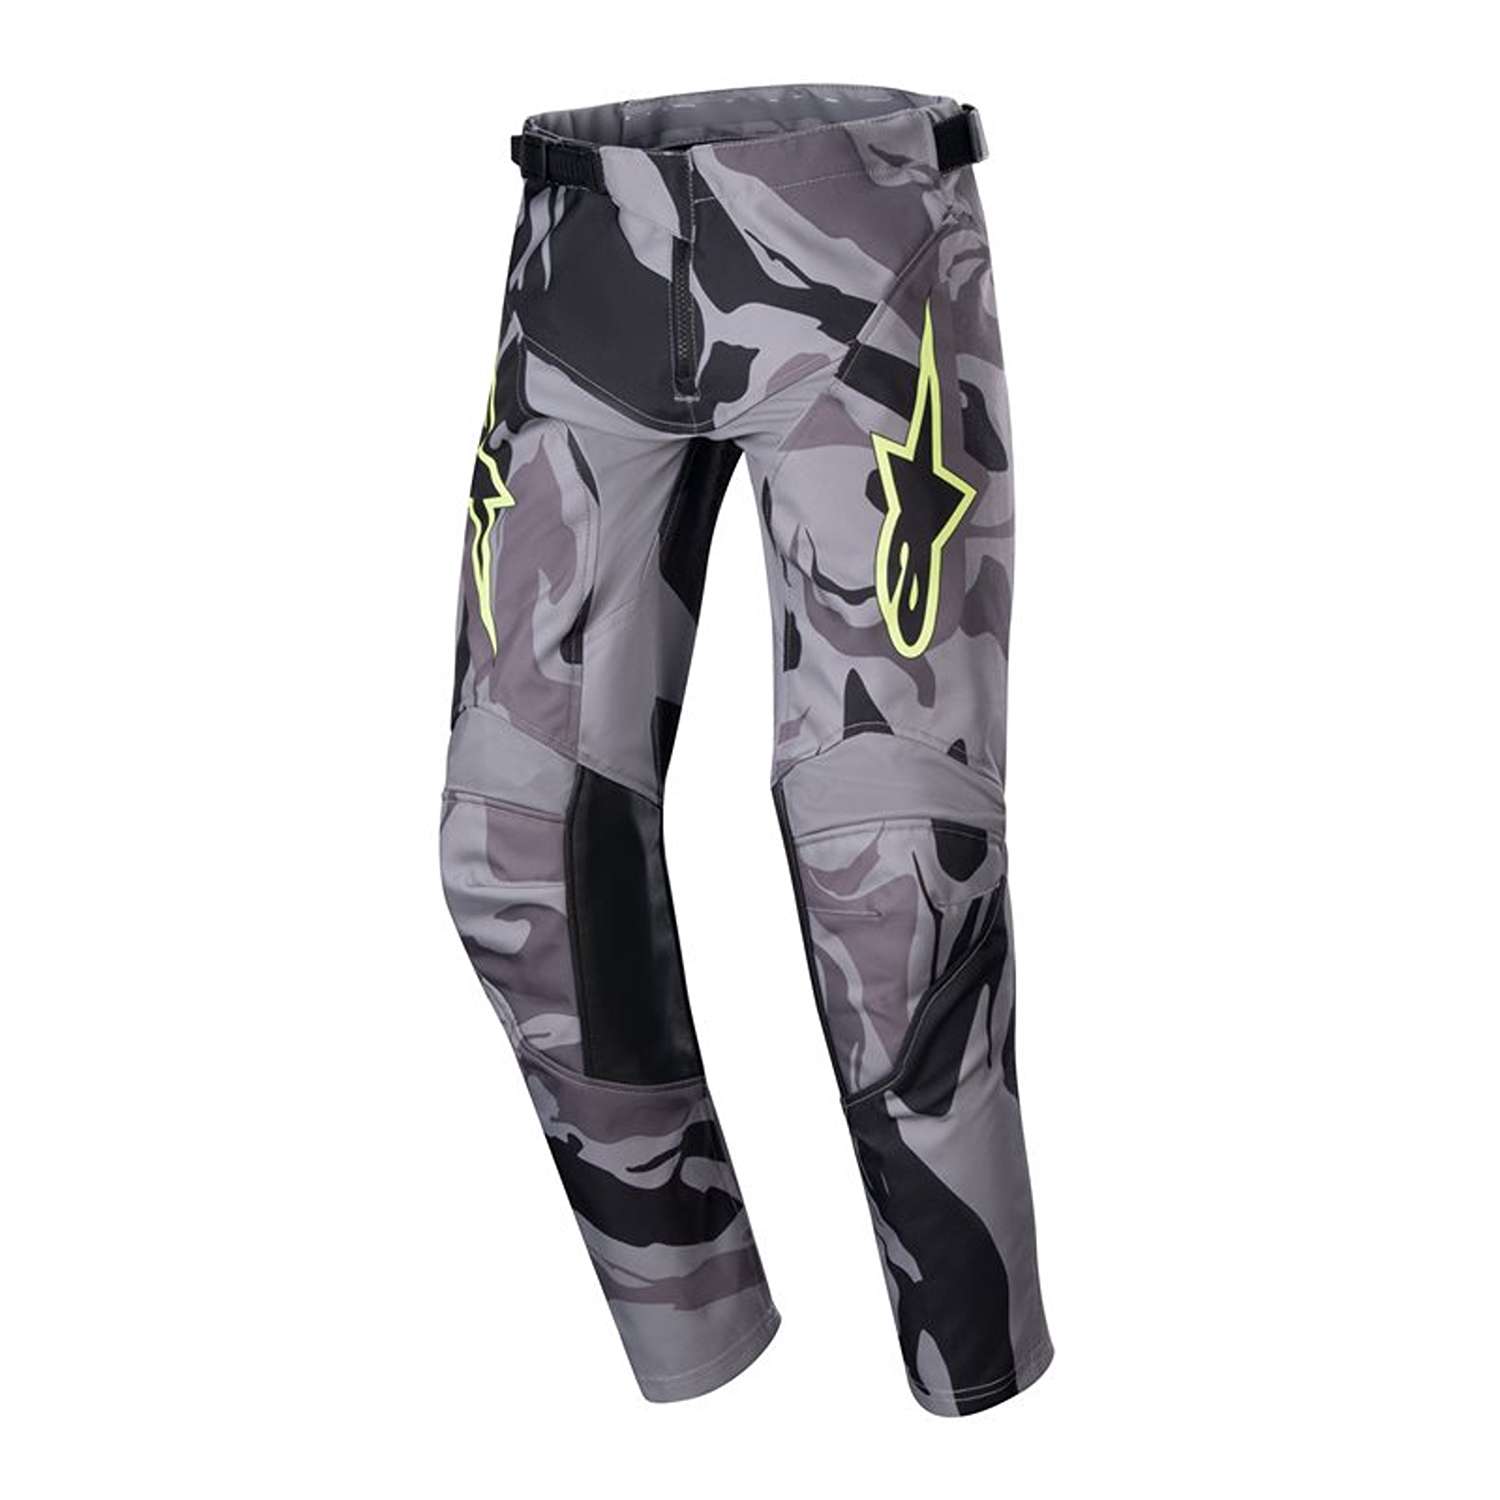 Image of Alpinestars Youth Racer Tactical Pants Cast Gray Camo Magnet Talla 24